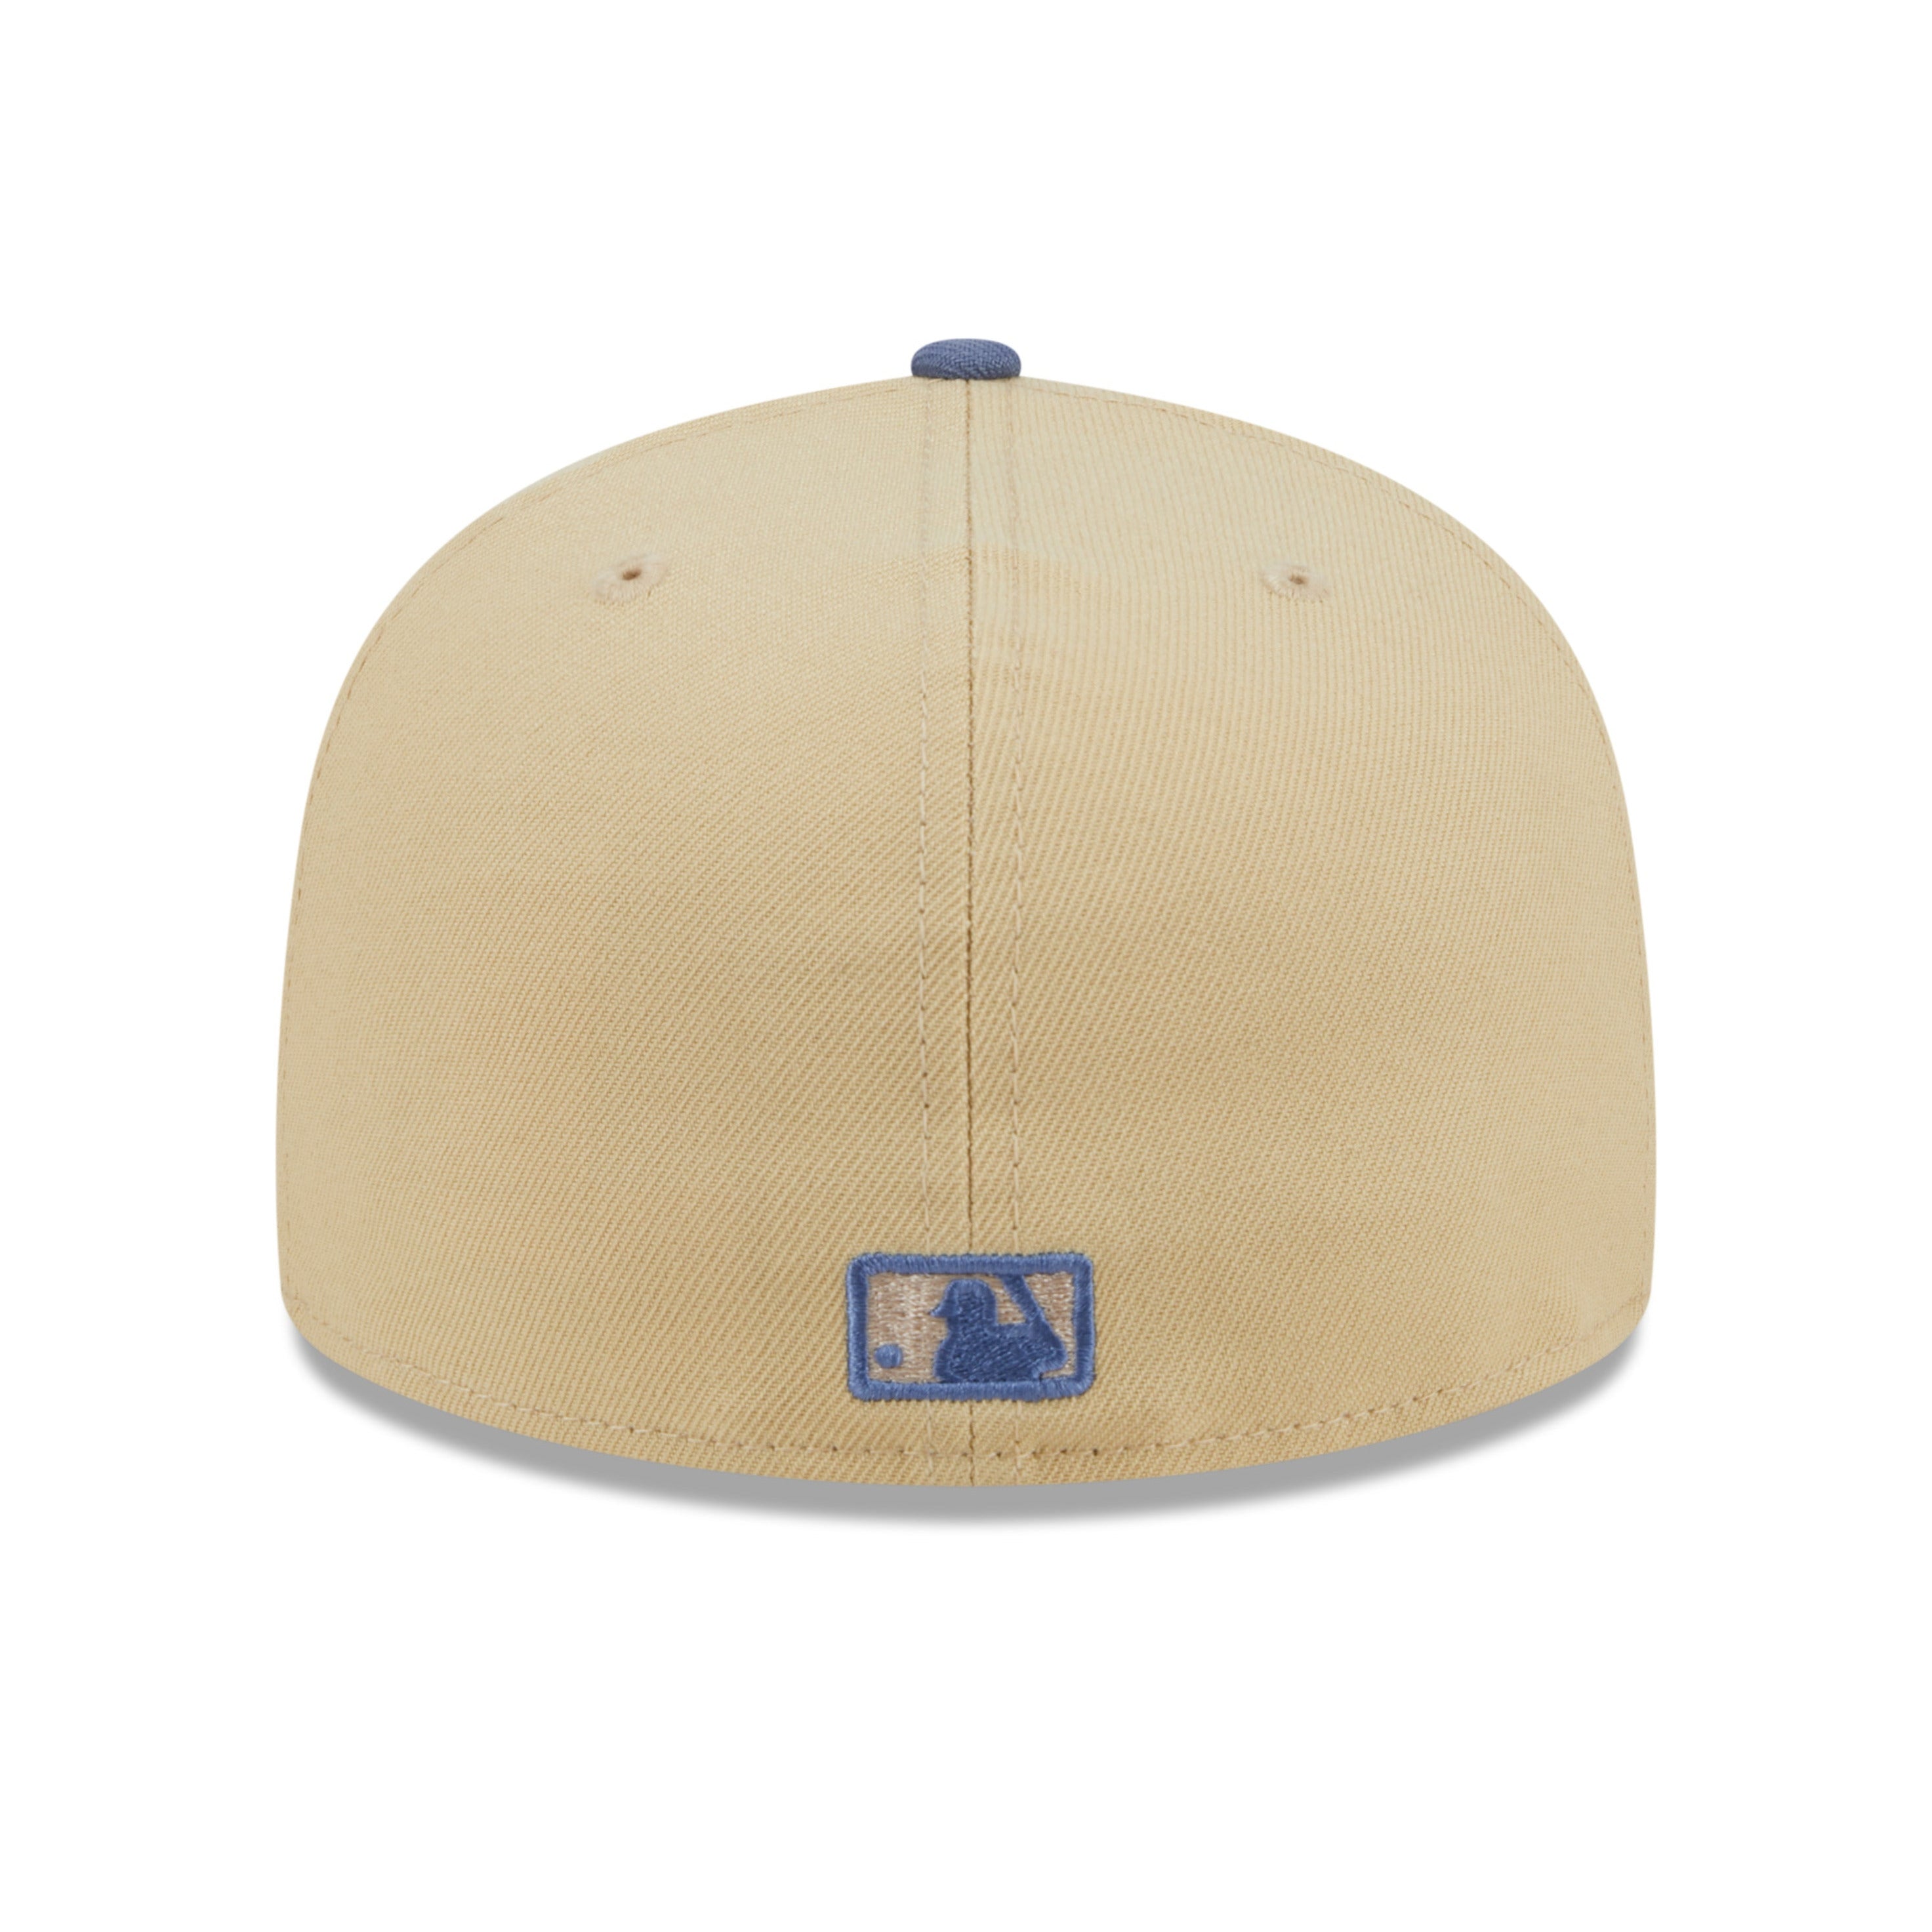 NEW ERA 59FIFTY MLB LOS ANGELES DODGERS TEAM LANDSCAPE TWO TONE / GREY UV FITTED CAP